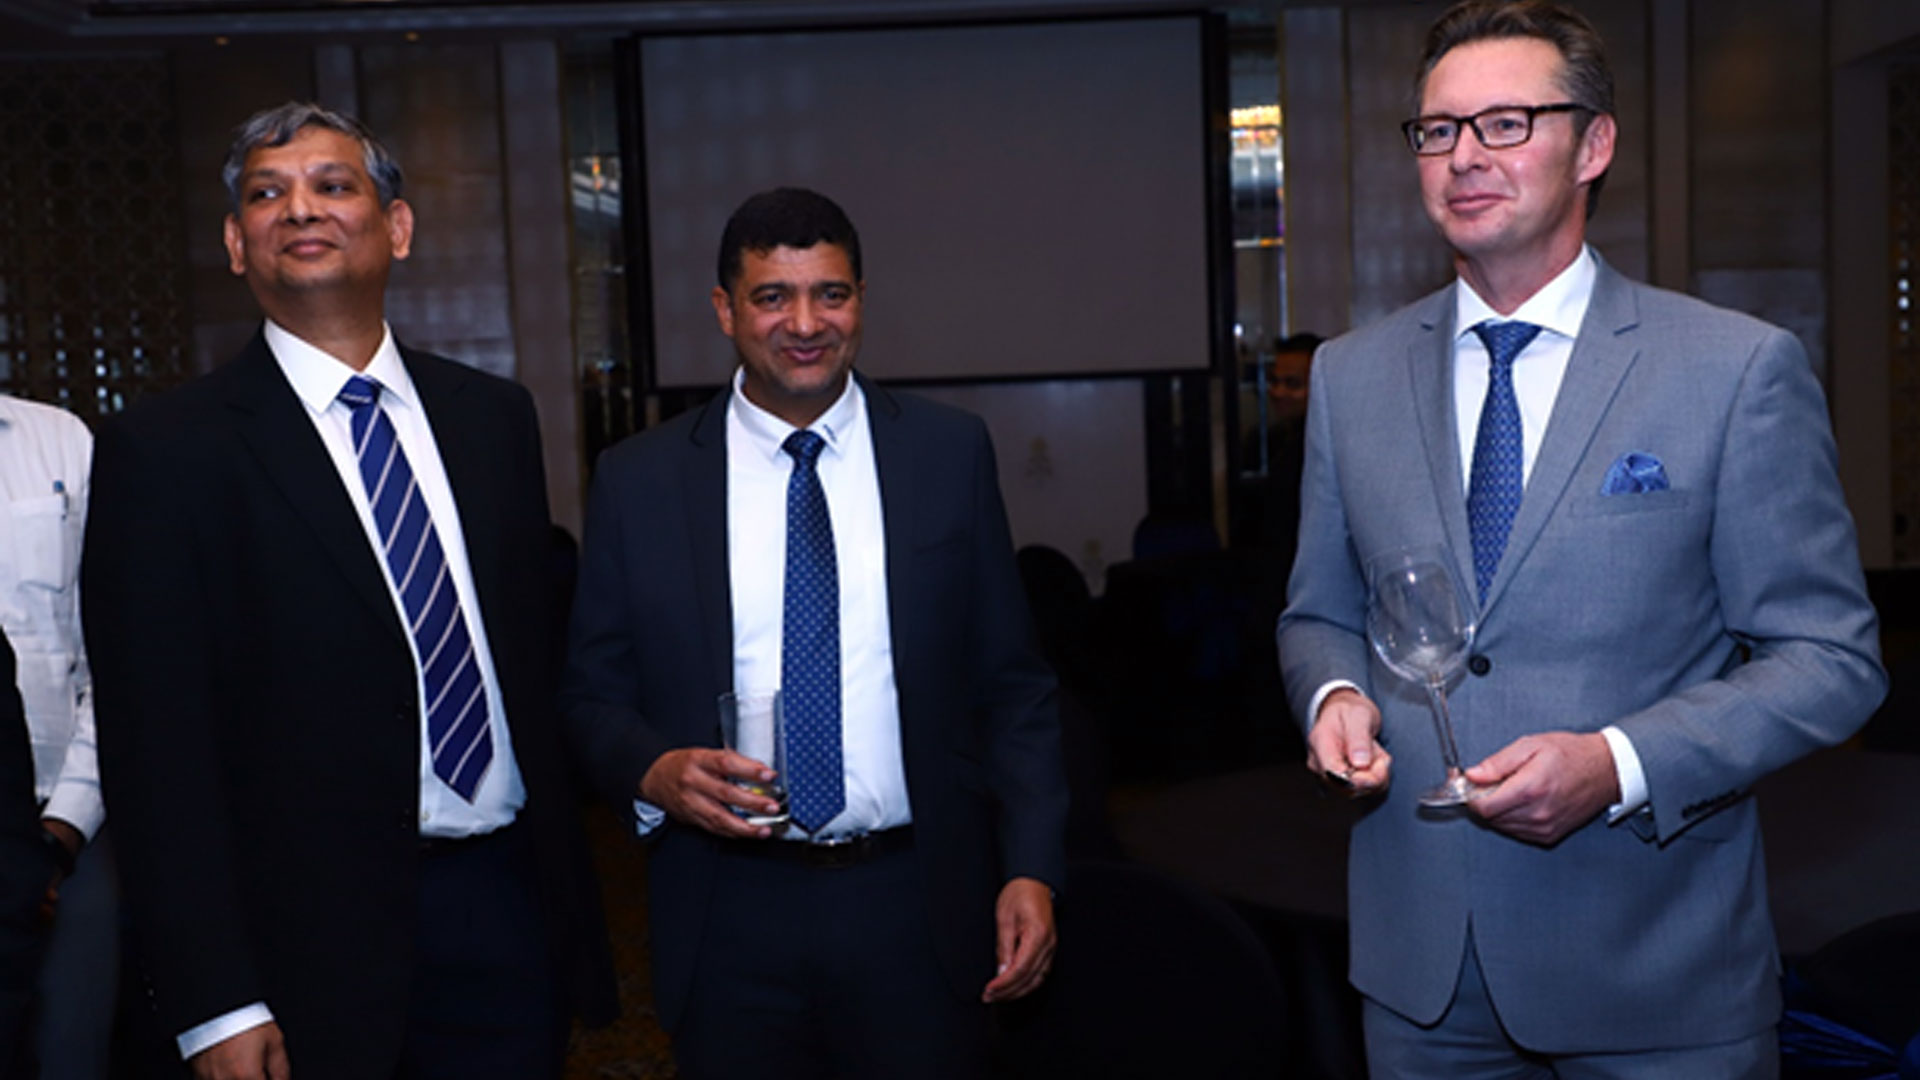 DNV GL SOUTH ASIA NATIONAL COMMITTEE MEETING AND ANNUAL DINNER 2019